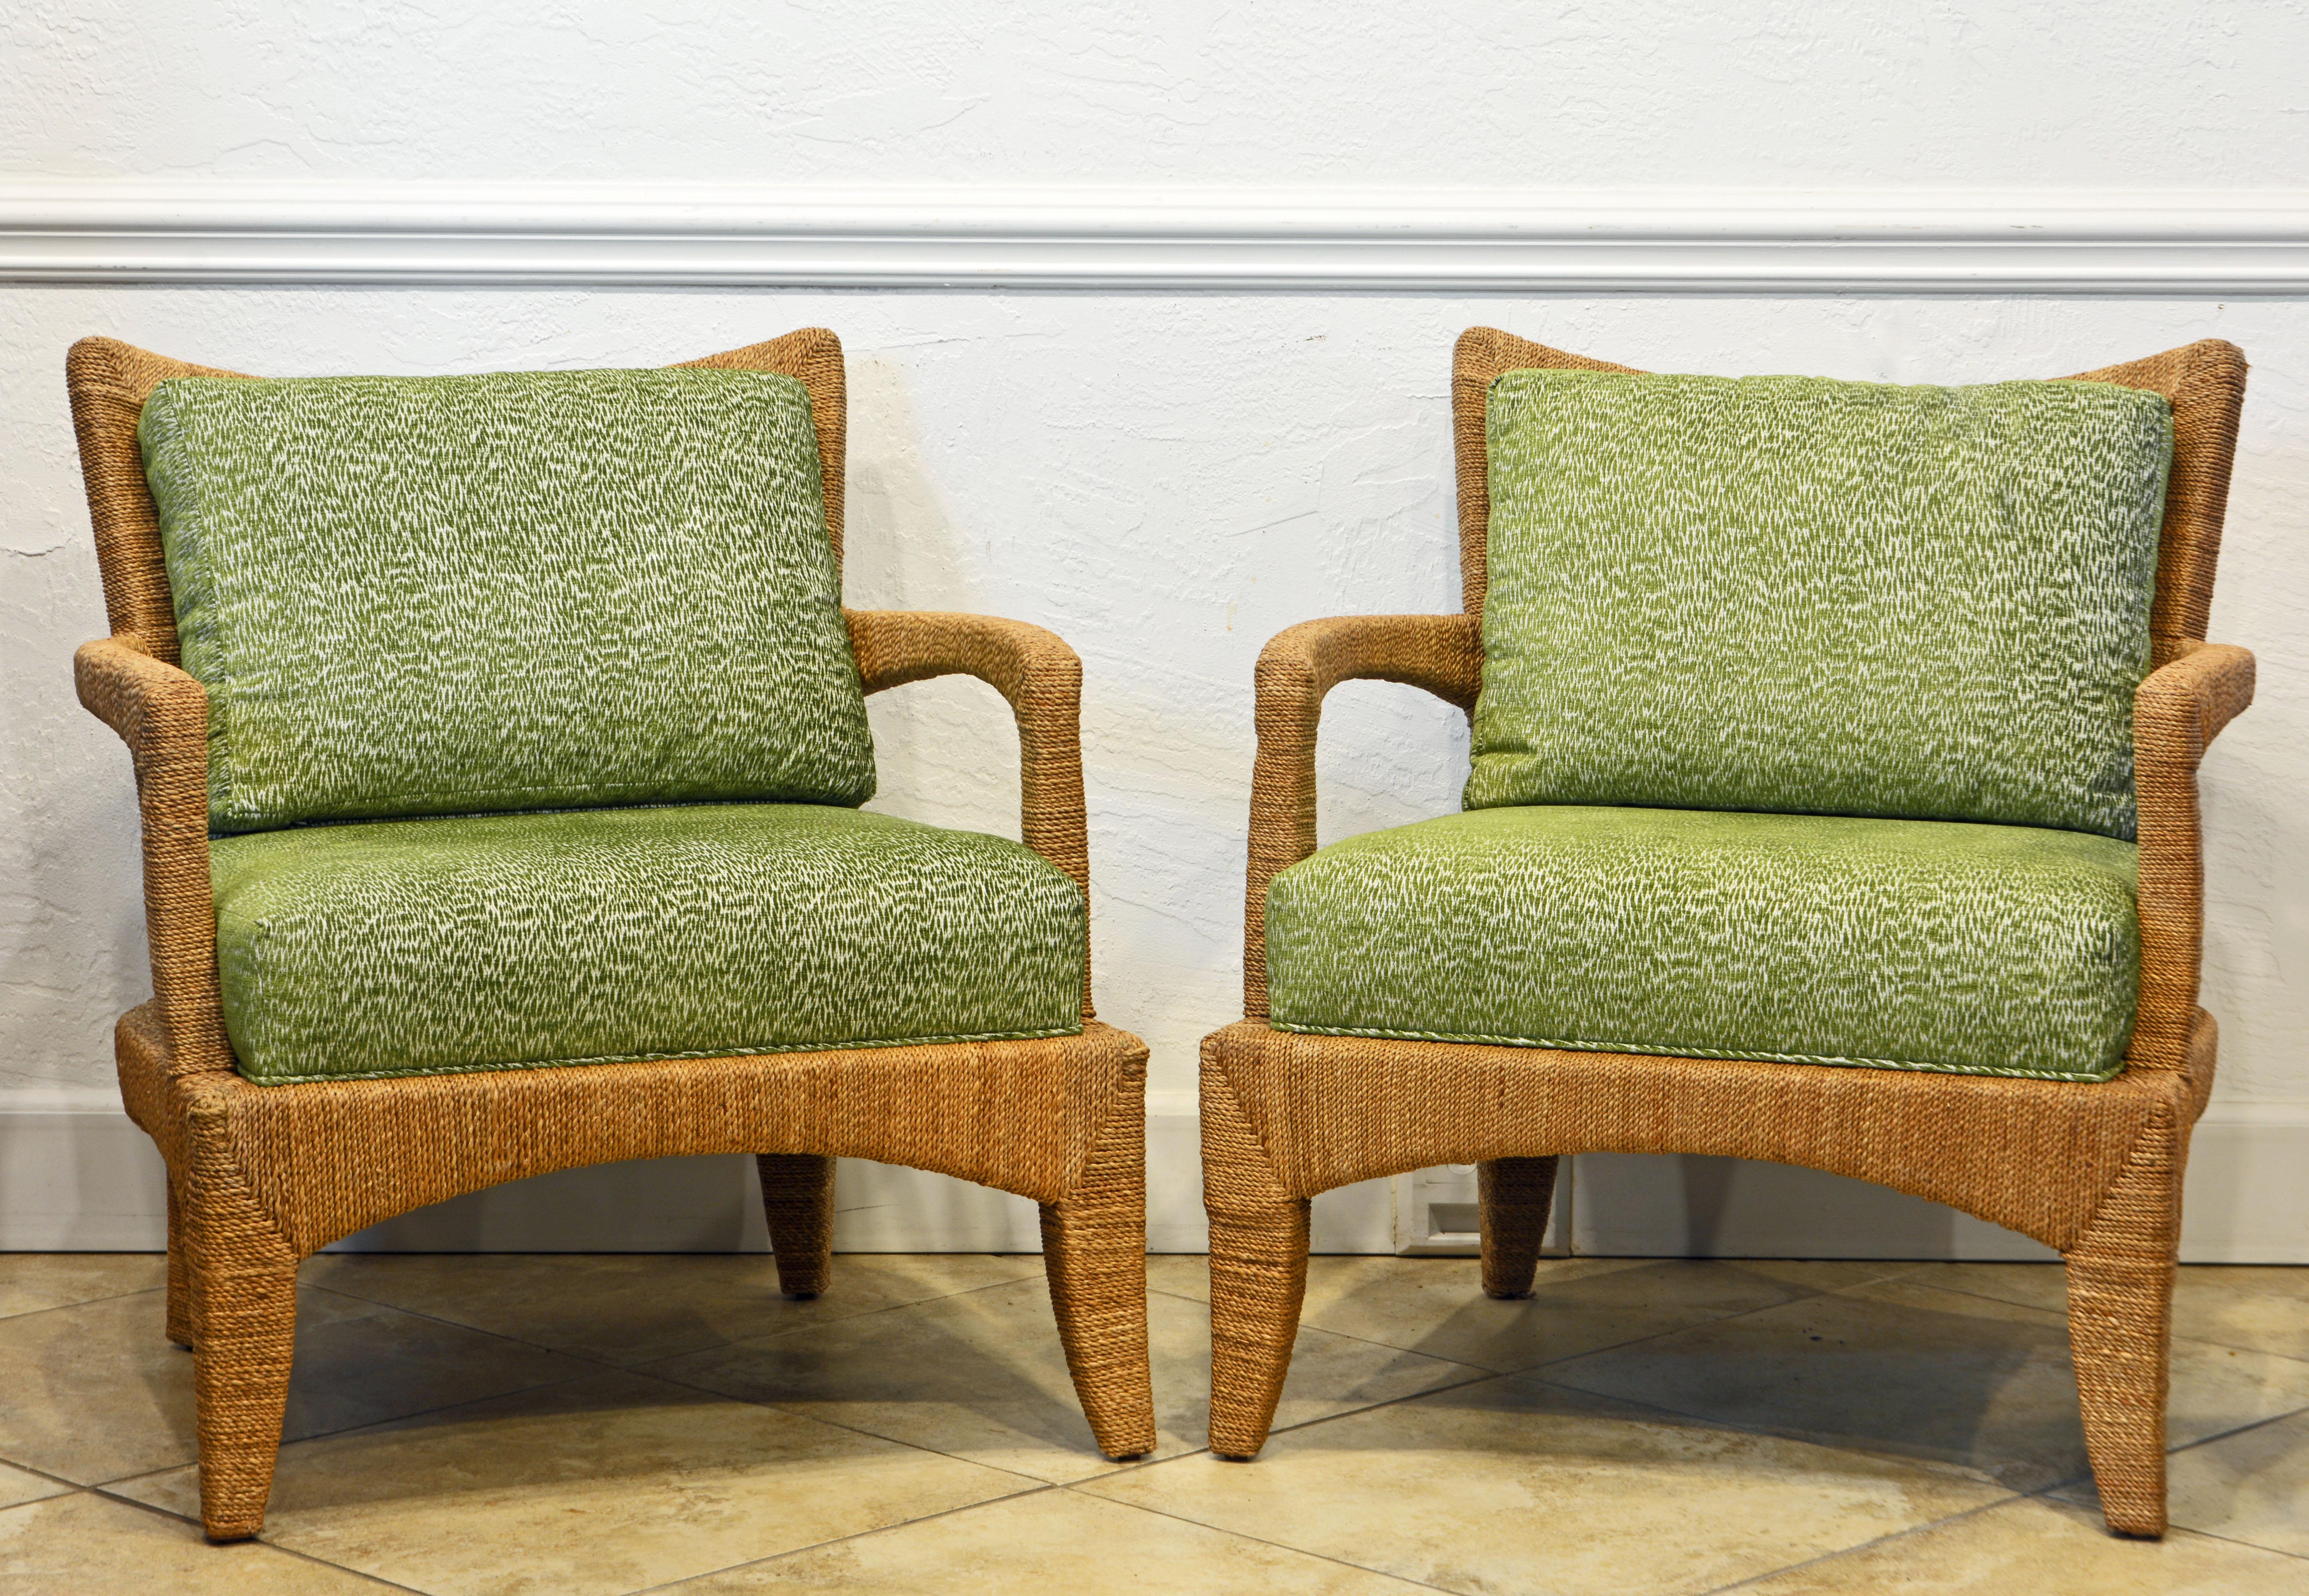 This pair of comfortable lounge chairs by Palecek consist of a hardwood frame wrapped with natural seagrass fiber in a pleasing pattern. With their organic pattern green tint cushions they will add a coastal and tropical flair to the interior.